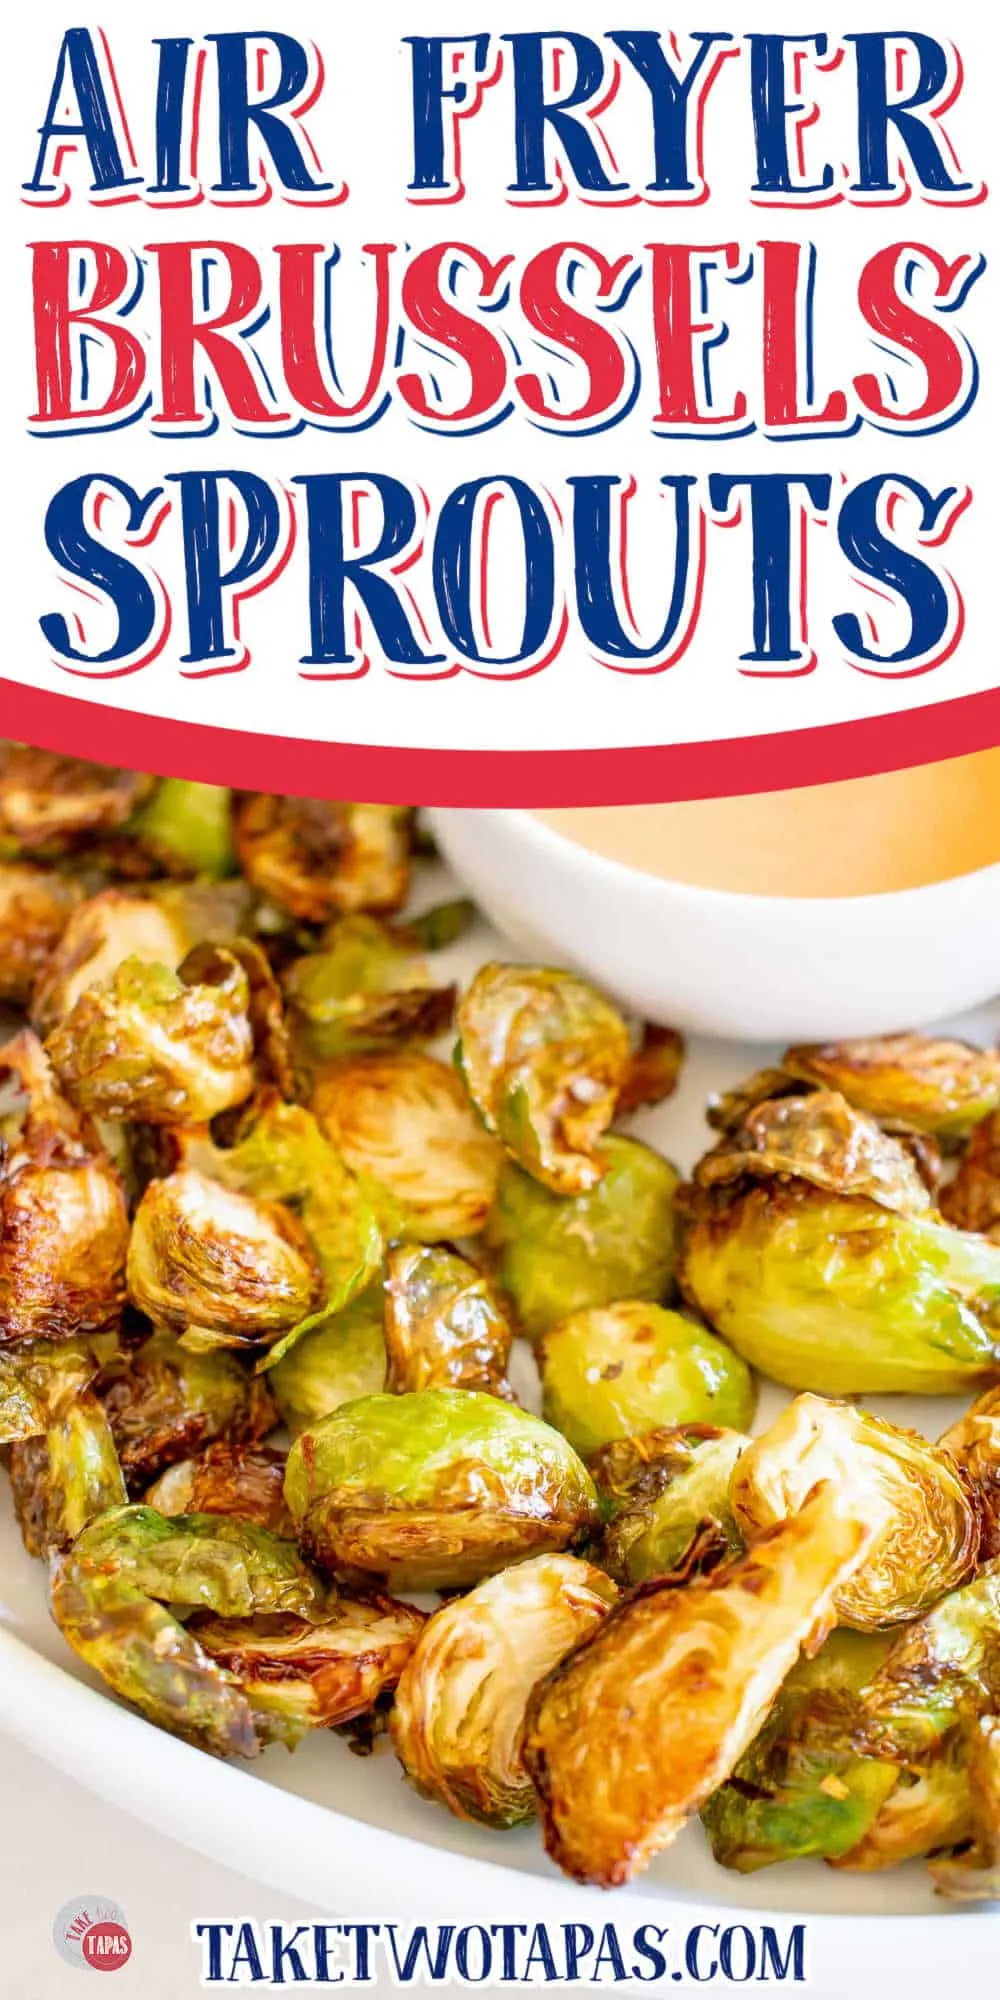 bowl of sprouts with white banner and text in red